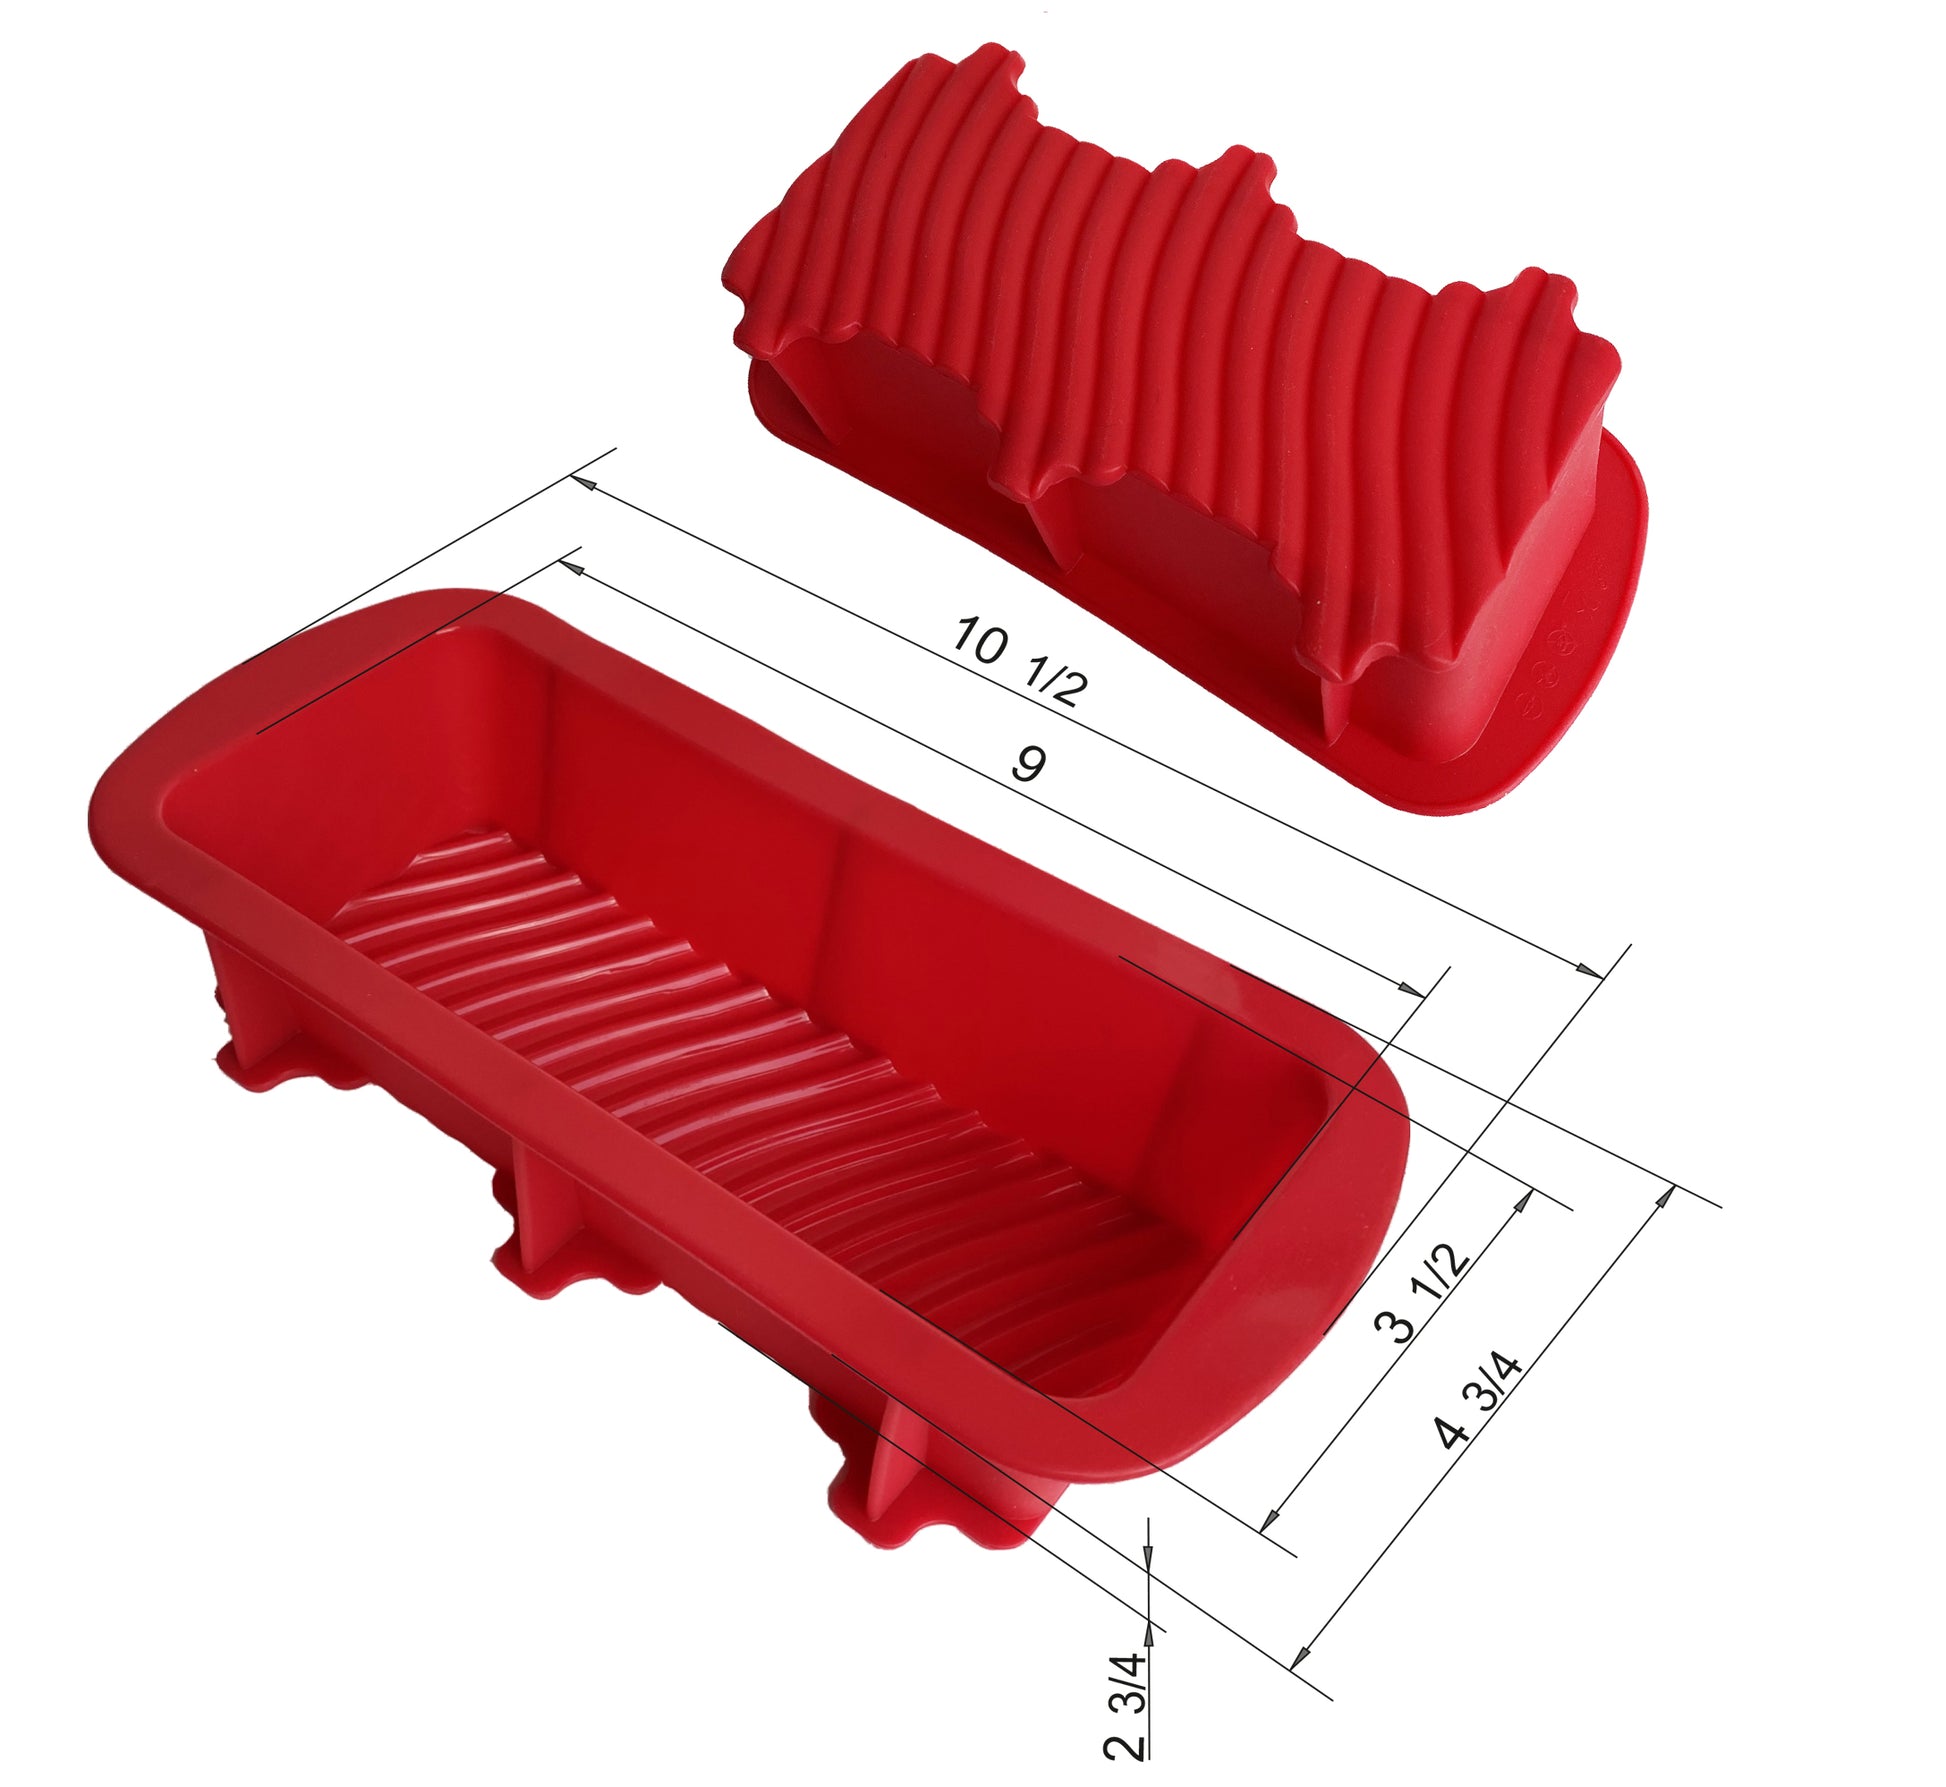 L'oven Ware Red Silicone Baking Pan ONLY 8x8 Model 22121